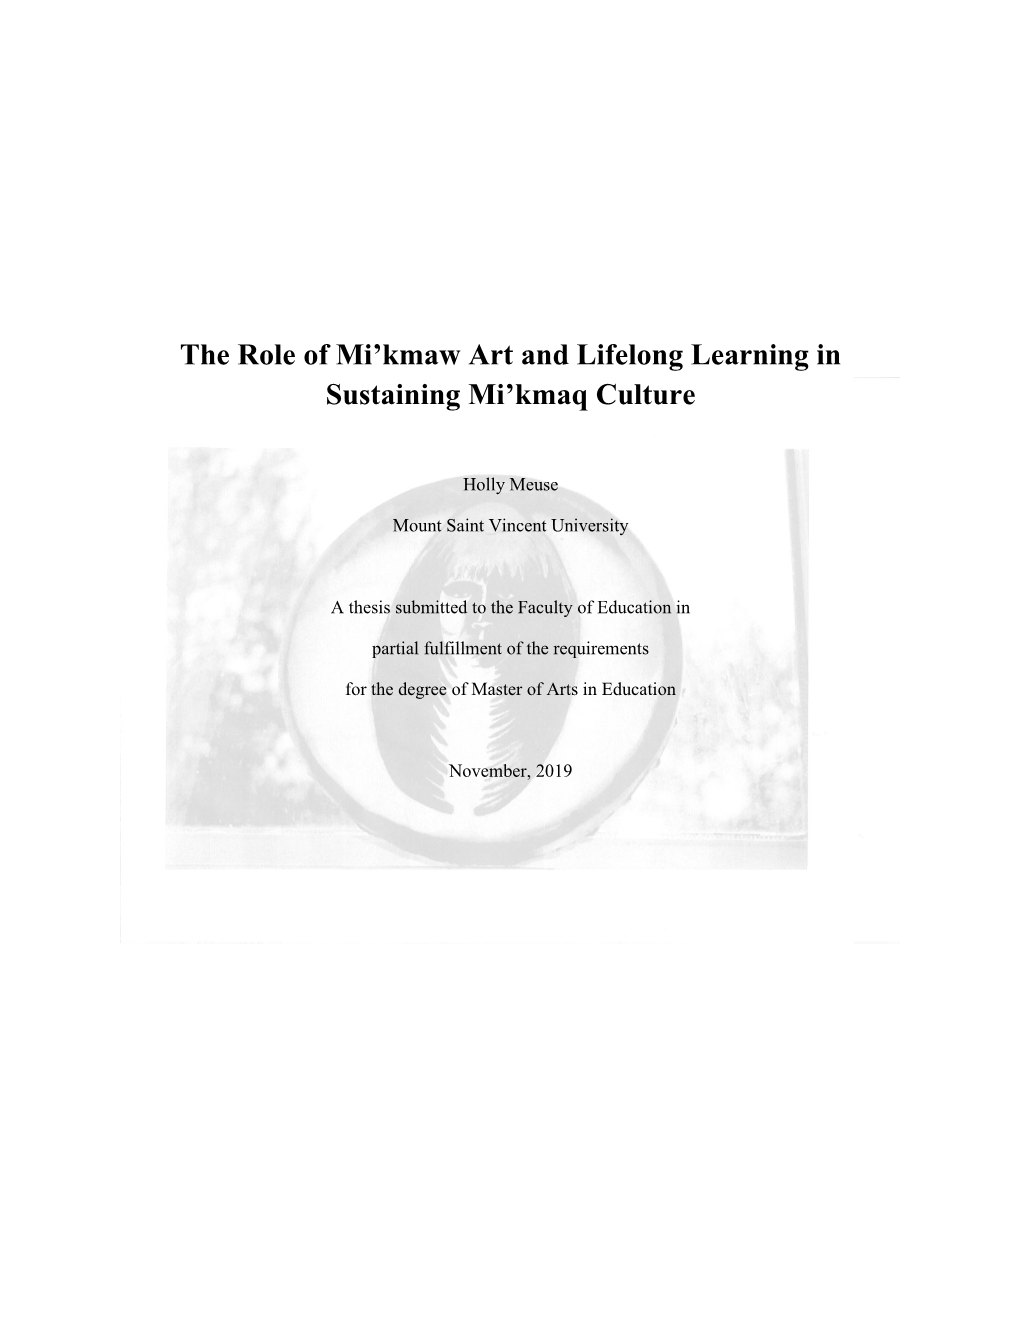 He Role of Mi'kmaw Art and Lifelong Learning in Sustaining Mi'kmaq